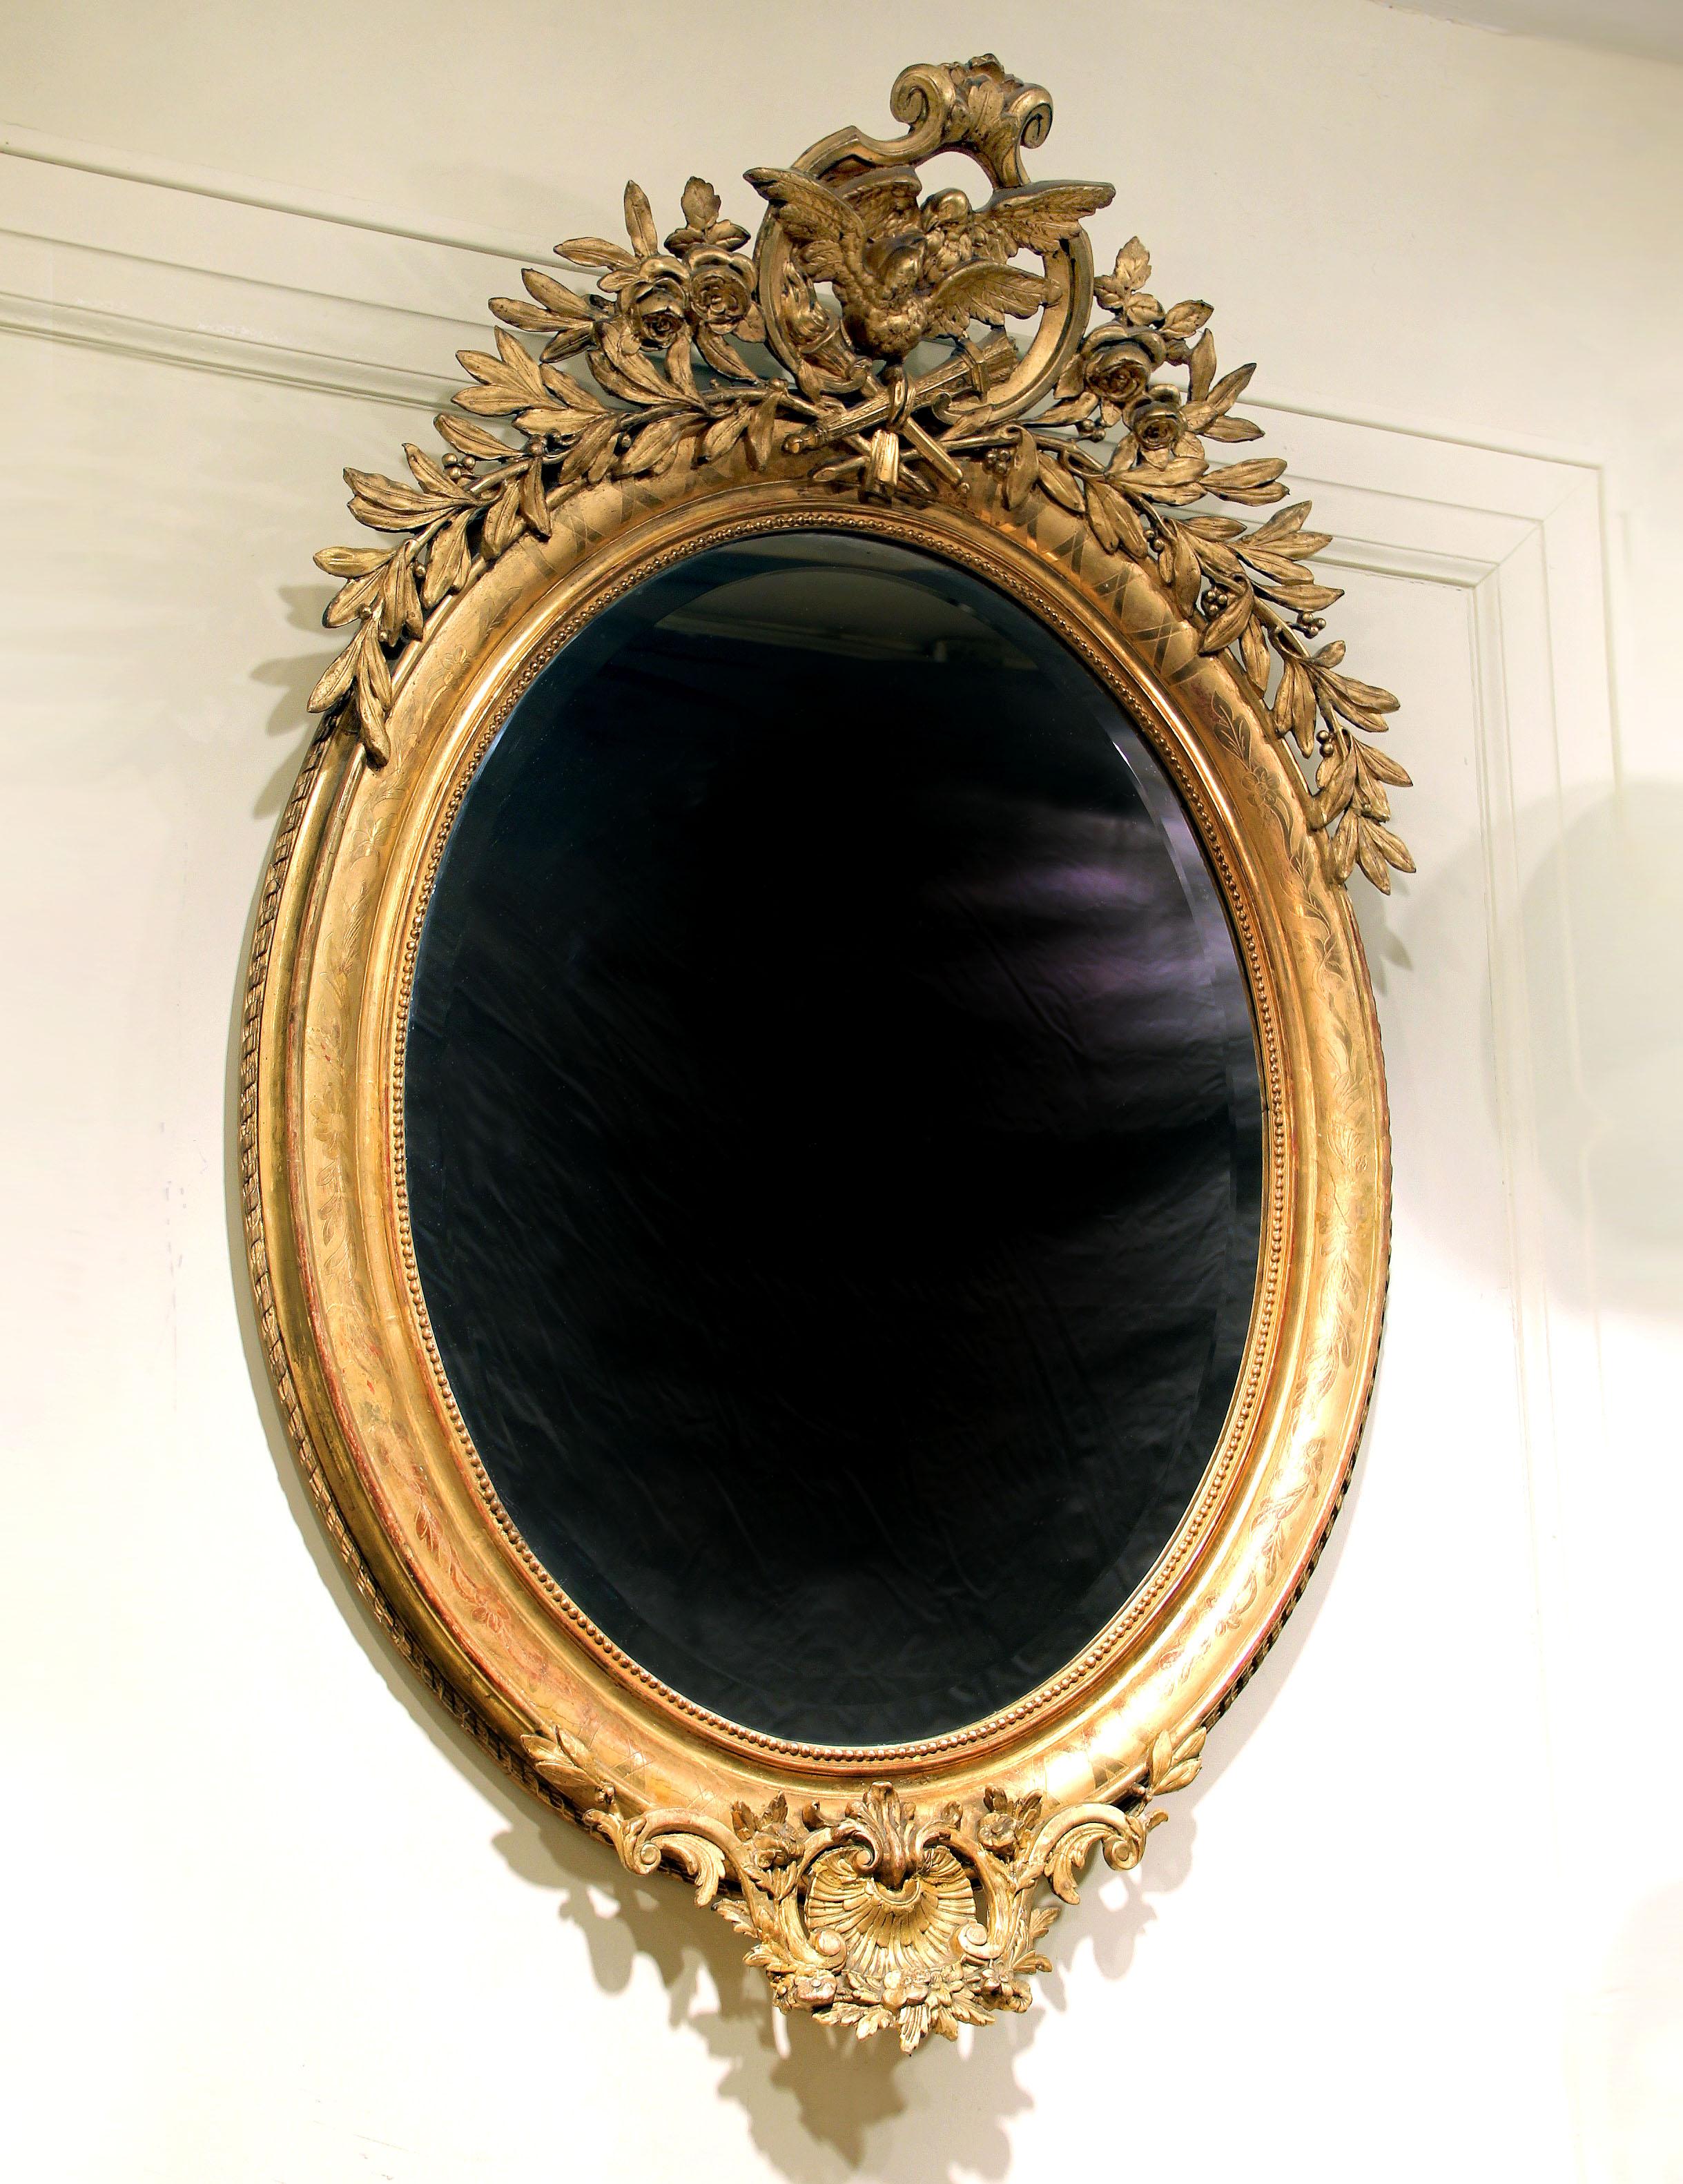 A fine late 19th century carved giltwood and gesso mirror

Of oval form with dove 